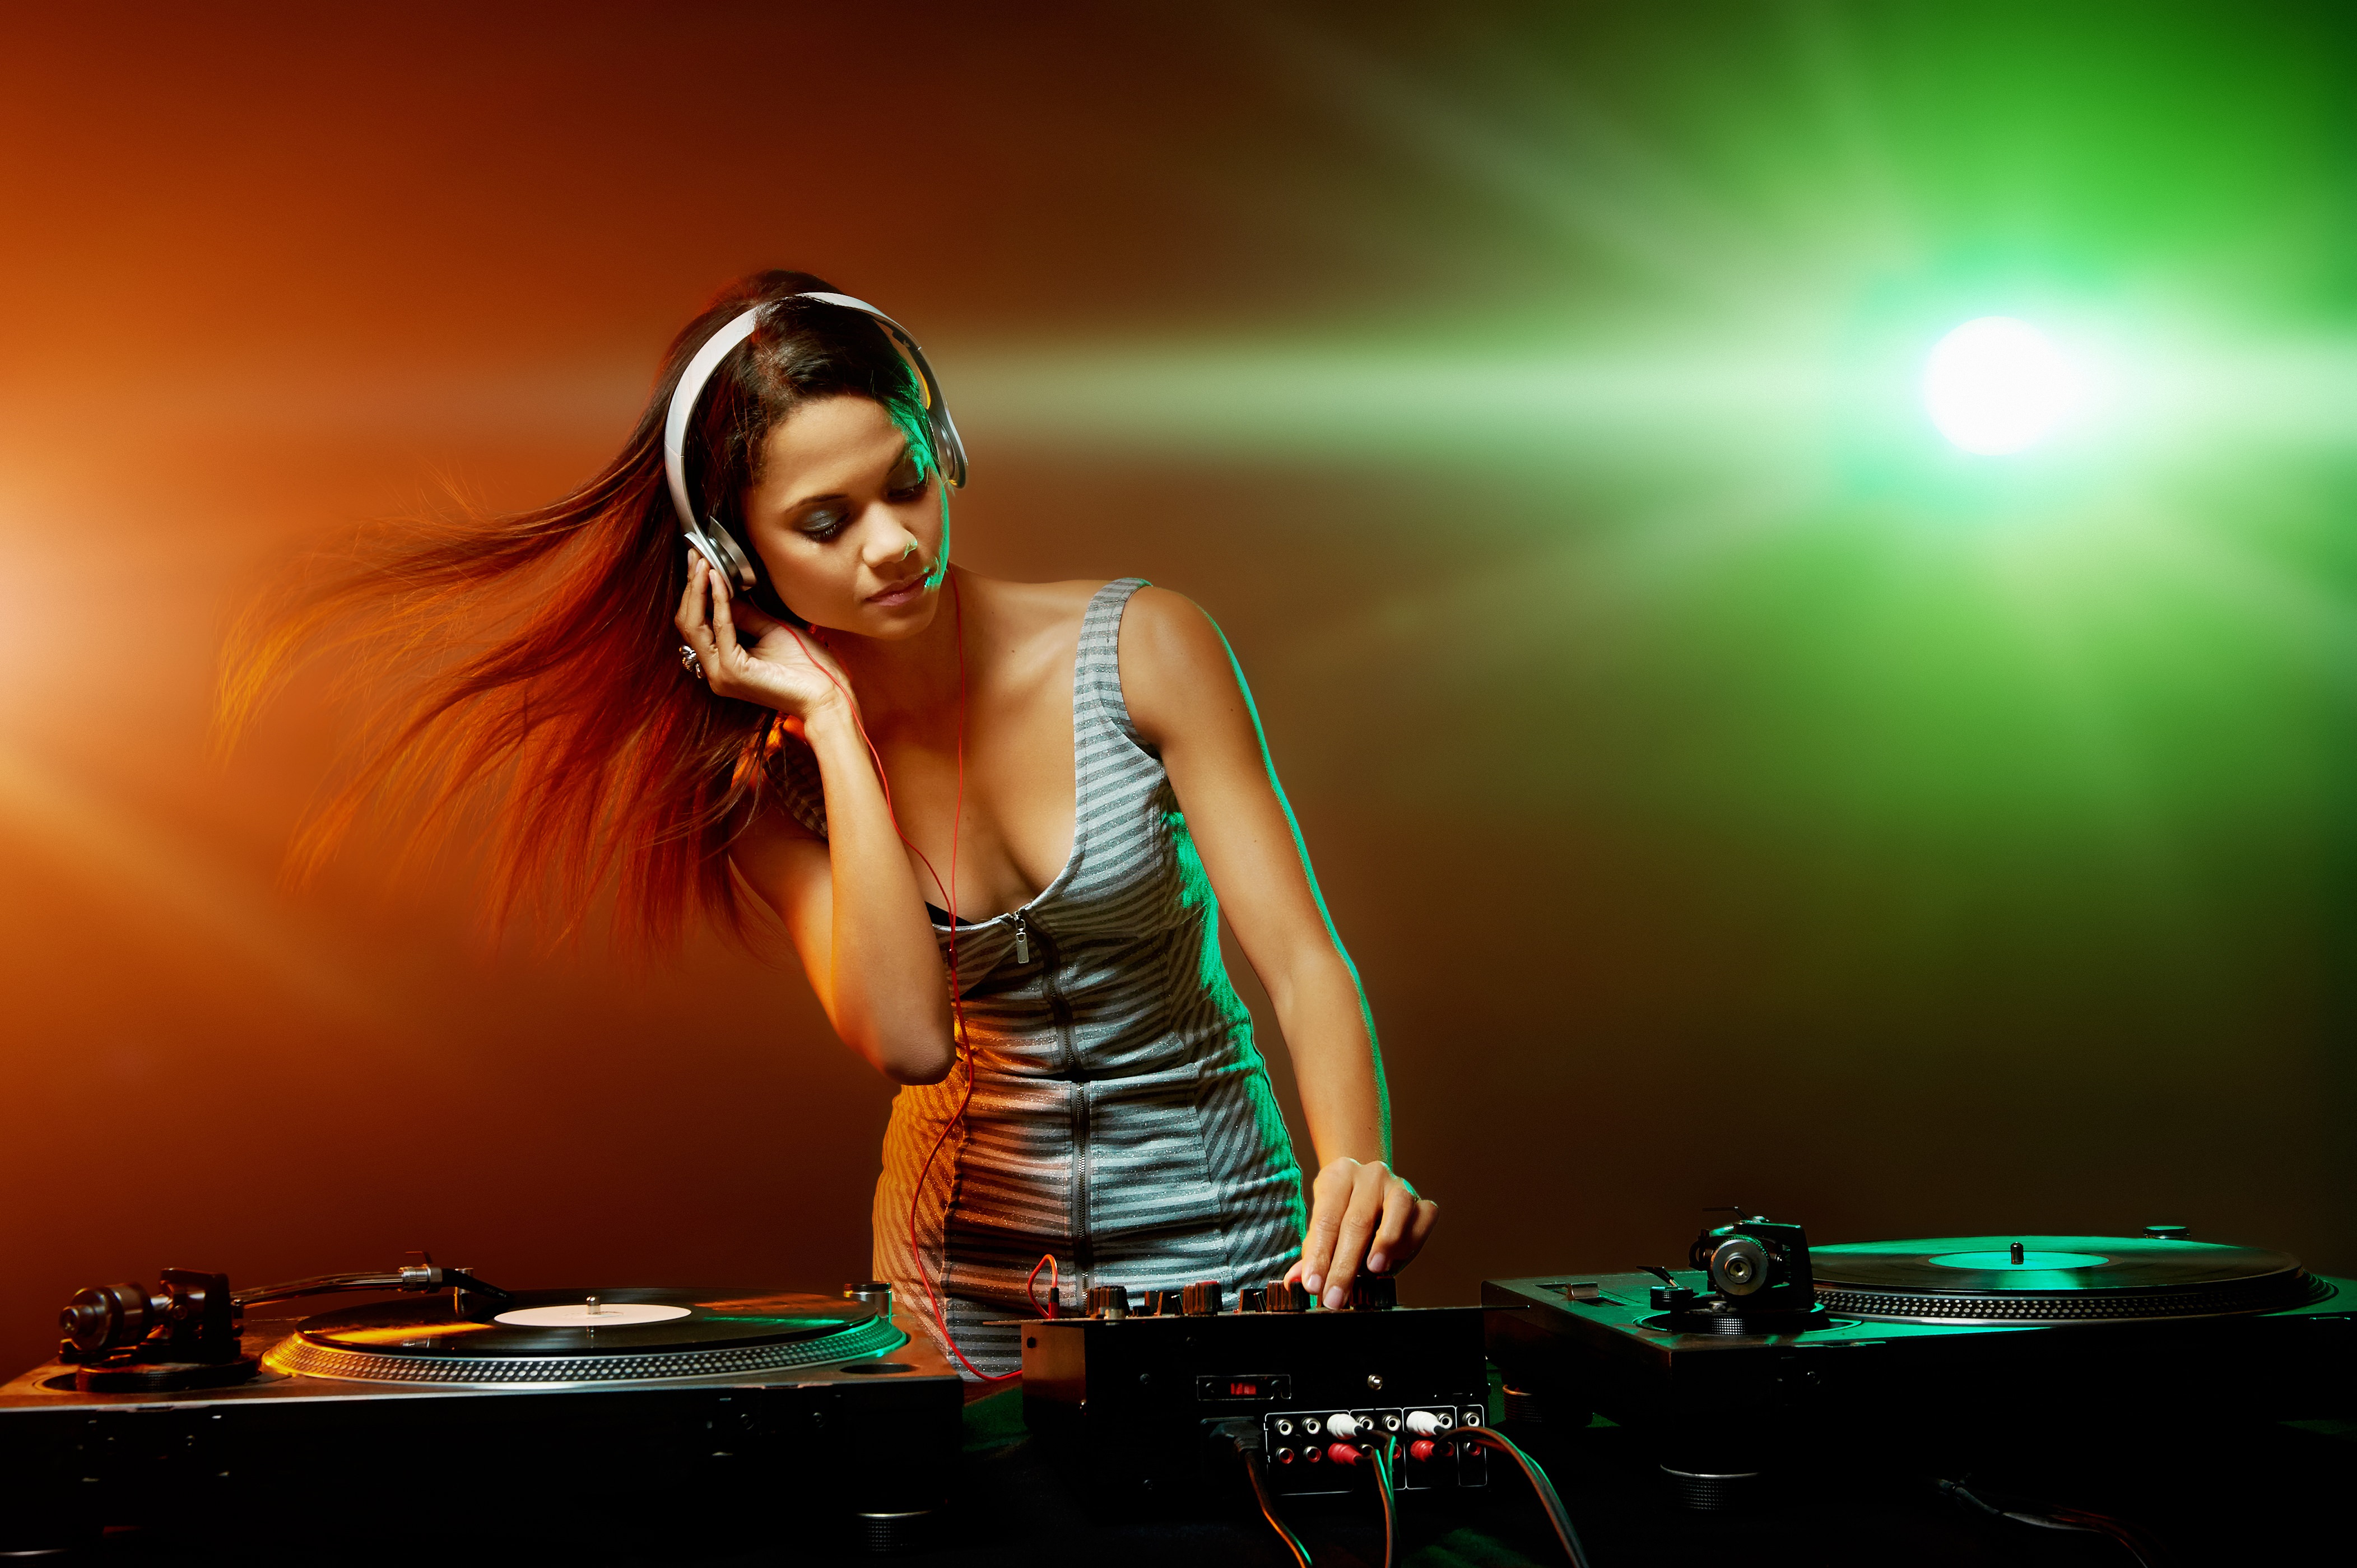 Party Dj Girl, HD Girls, 4k Wallpaper, Image, Background, Photo and Picture